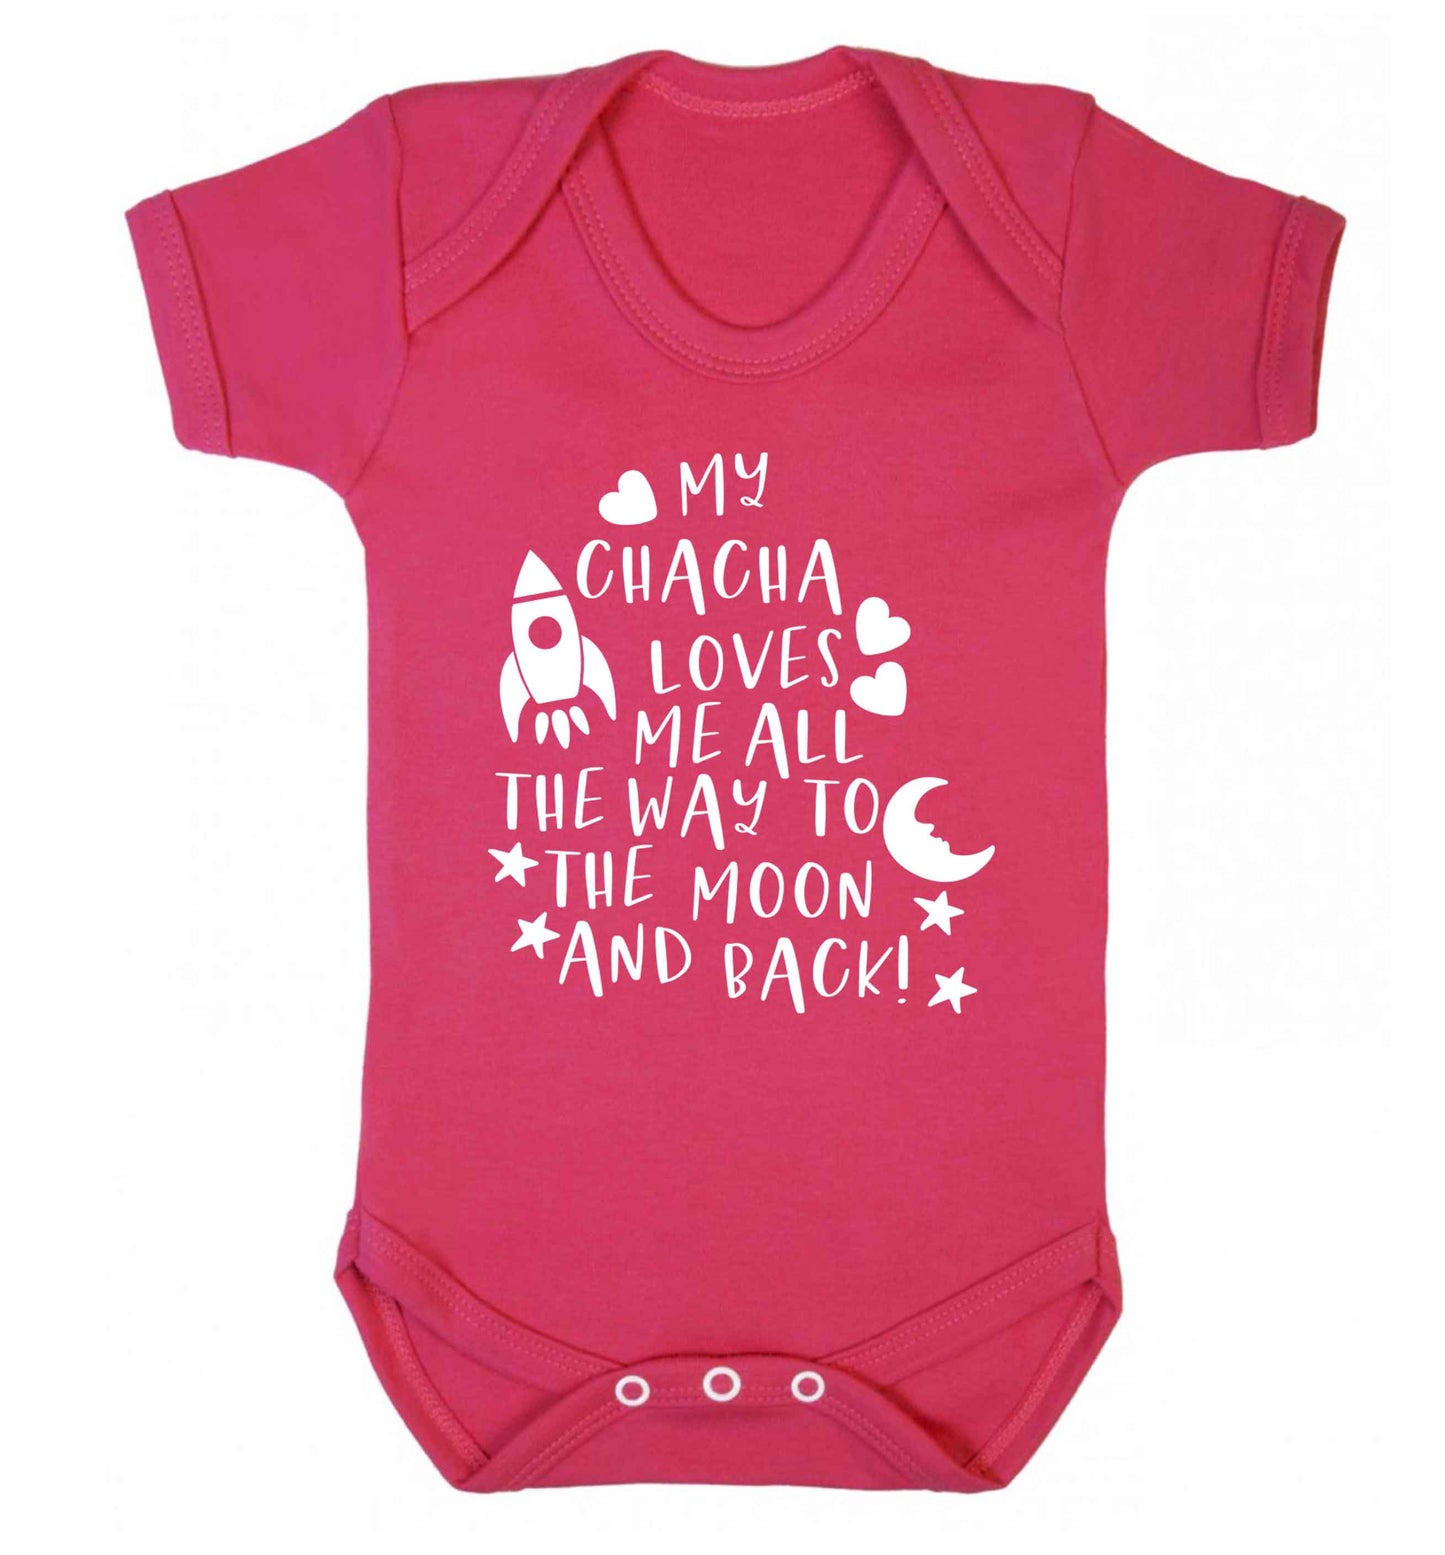 My chacha loves me all the way to the moon and back Baby Vest dark pink 18-24 months